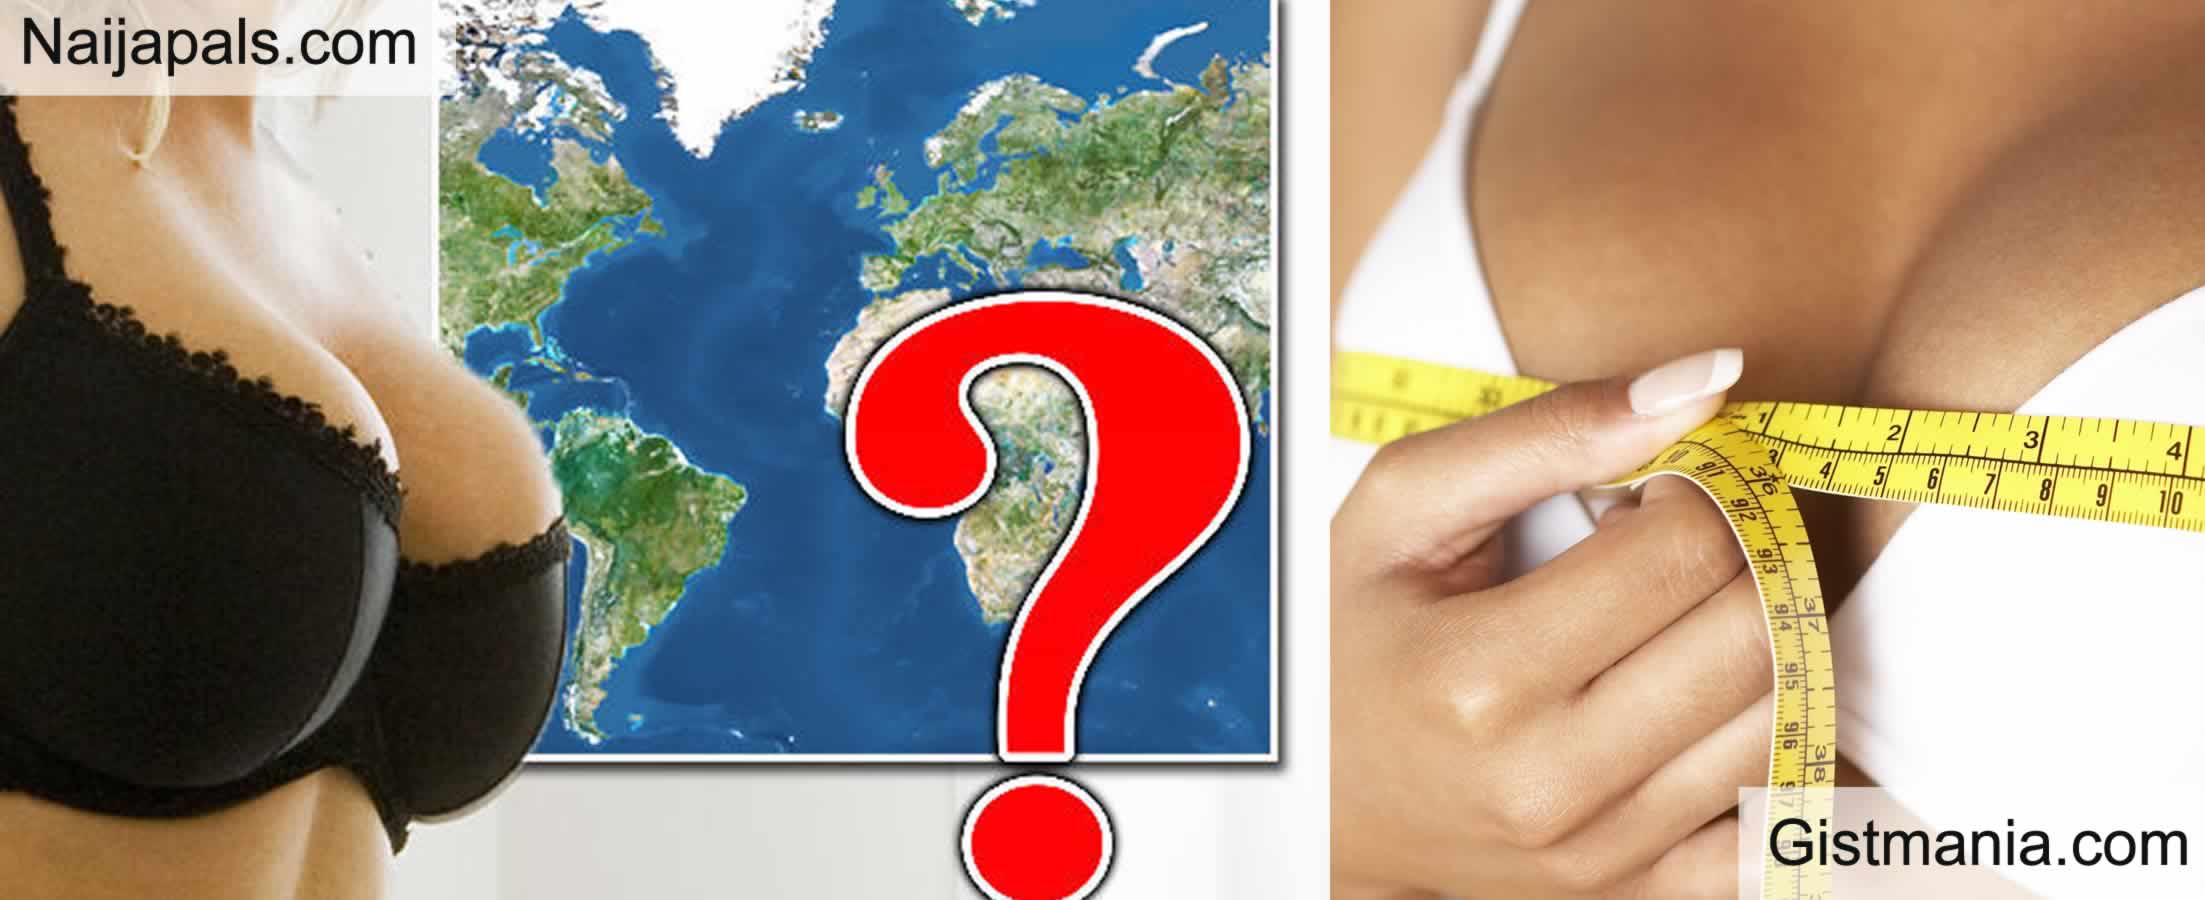 The countries with the biggest breast size revealed - how do you